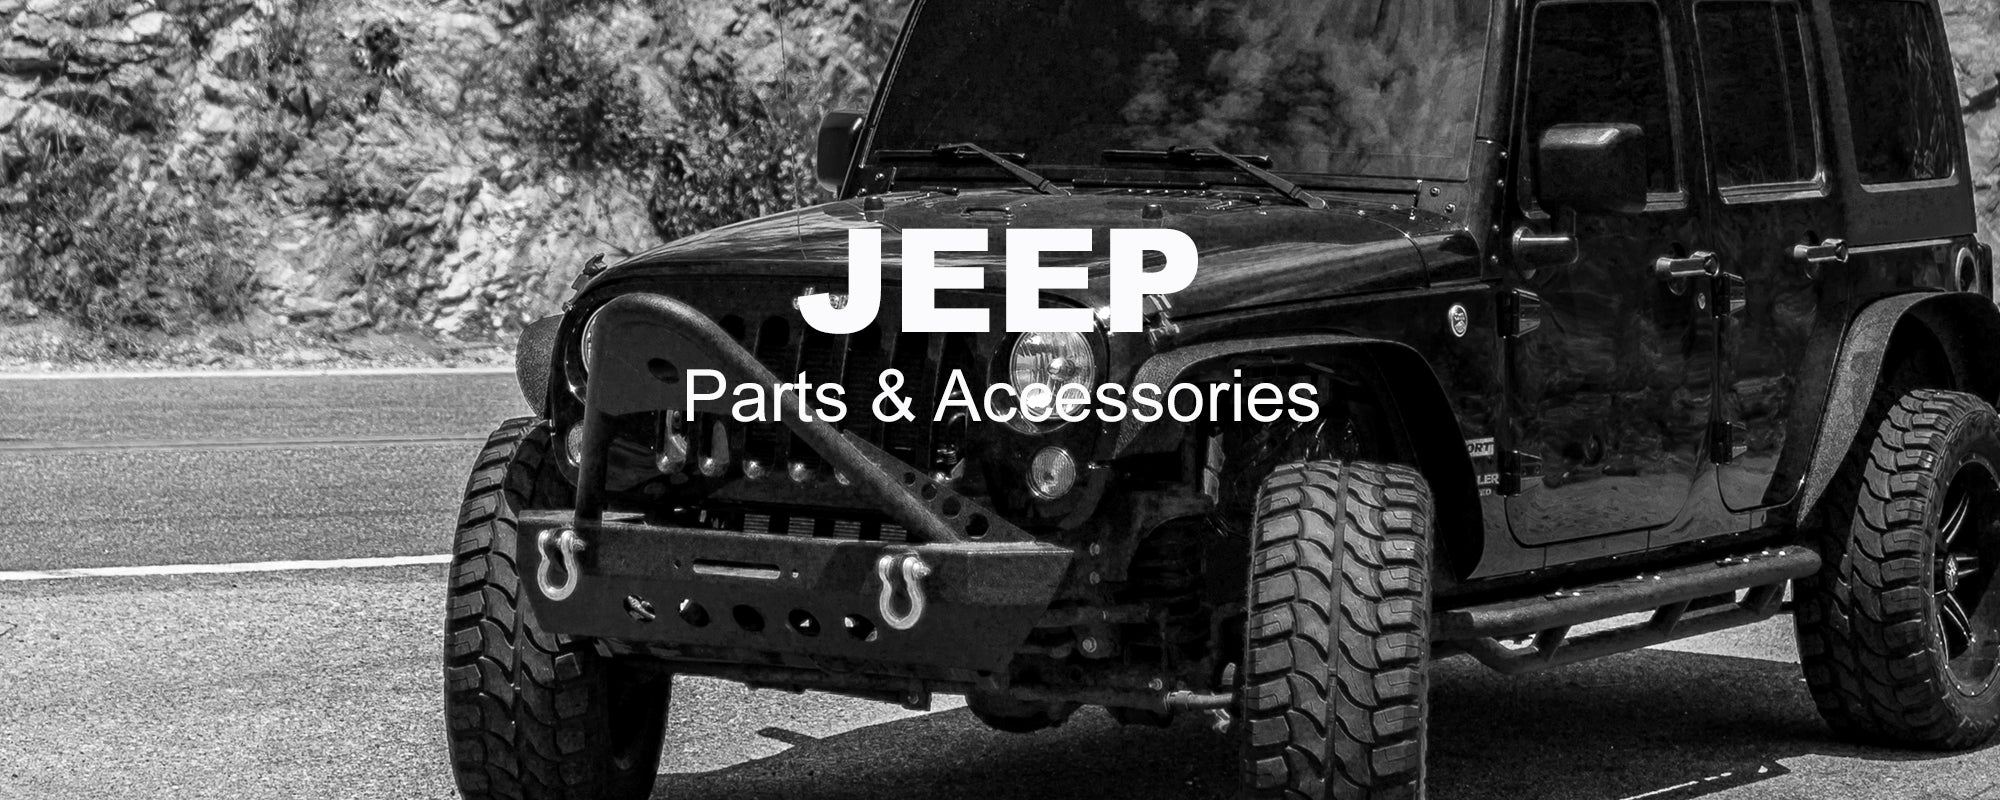 Jeep banner 2000x800